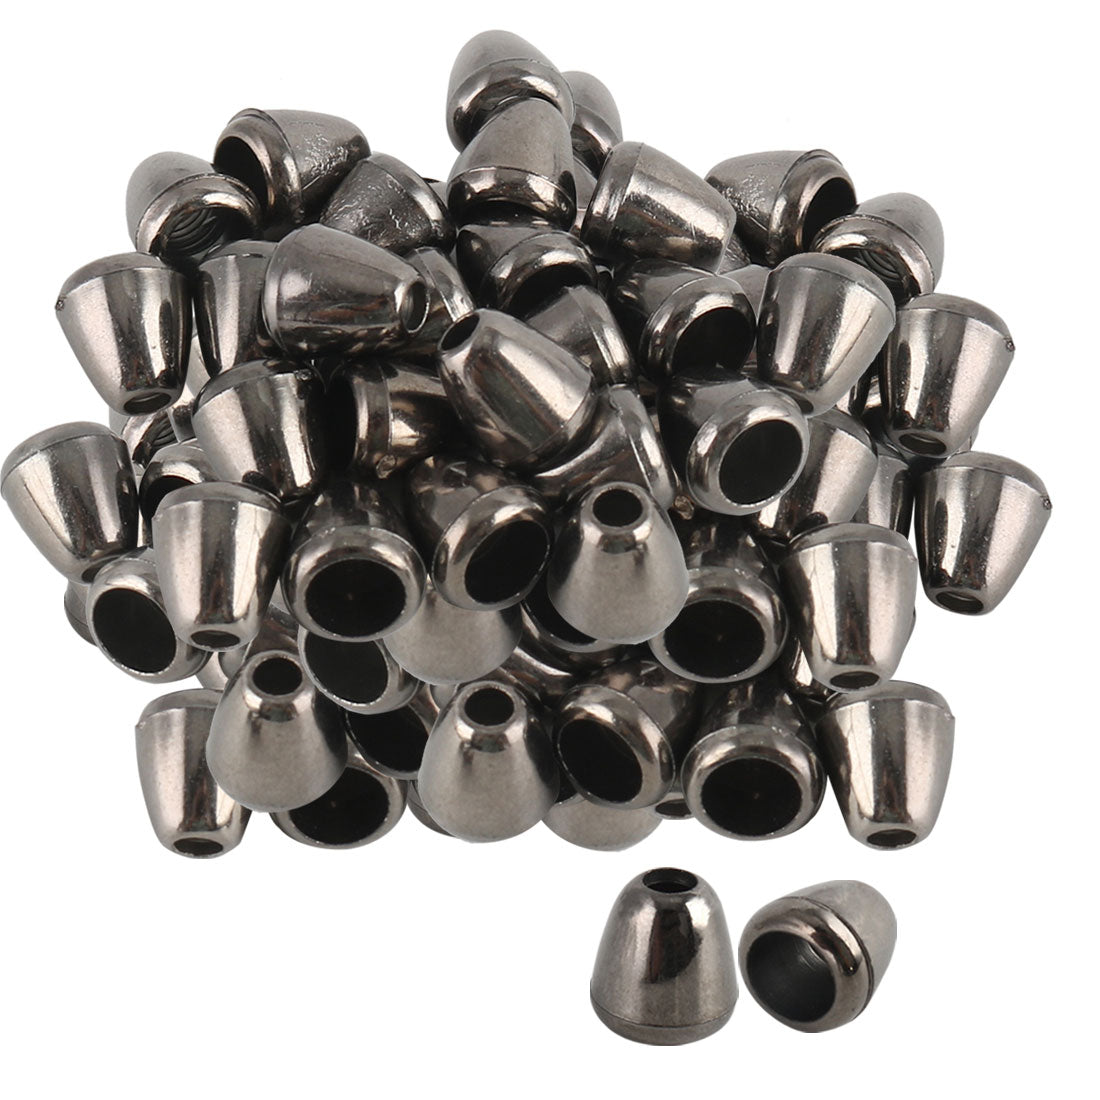 uxcell Uxcell 100pcs Plastic Bell End Stoppers Cord Rope Lock Lanyard Fastener Metal Black